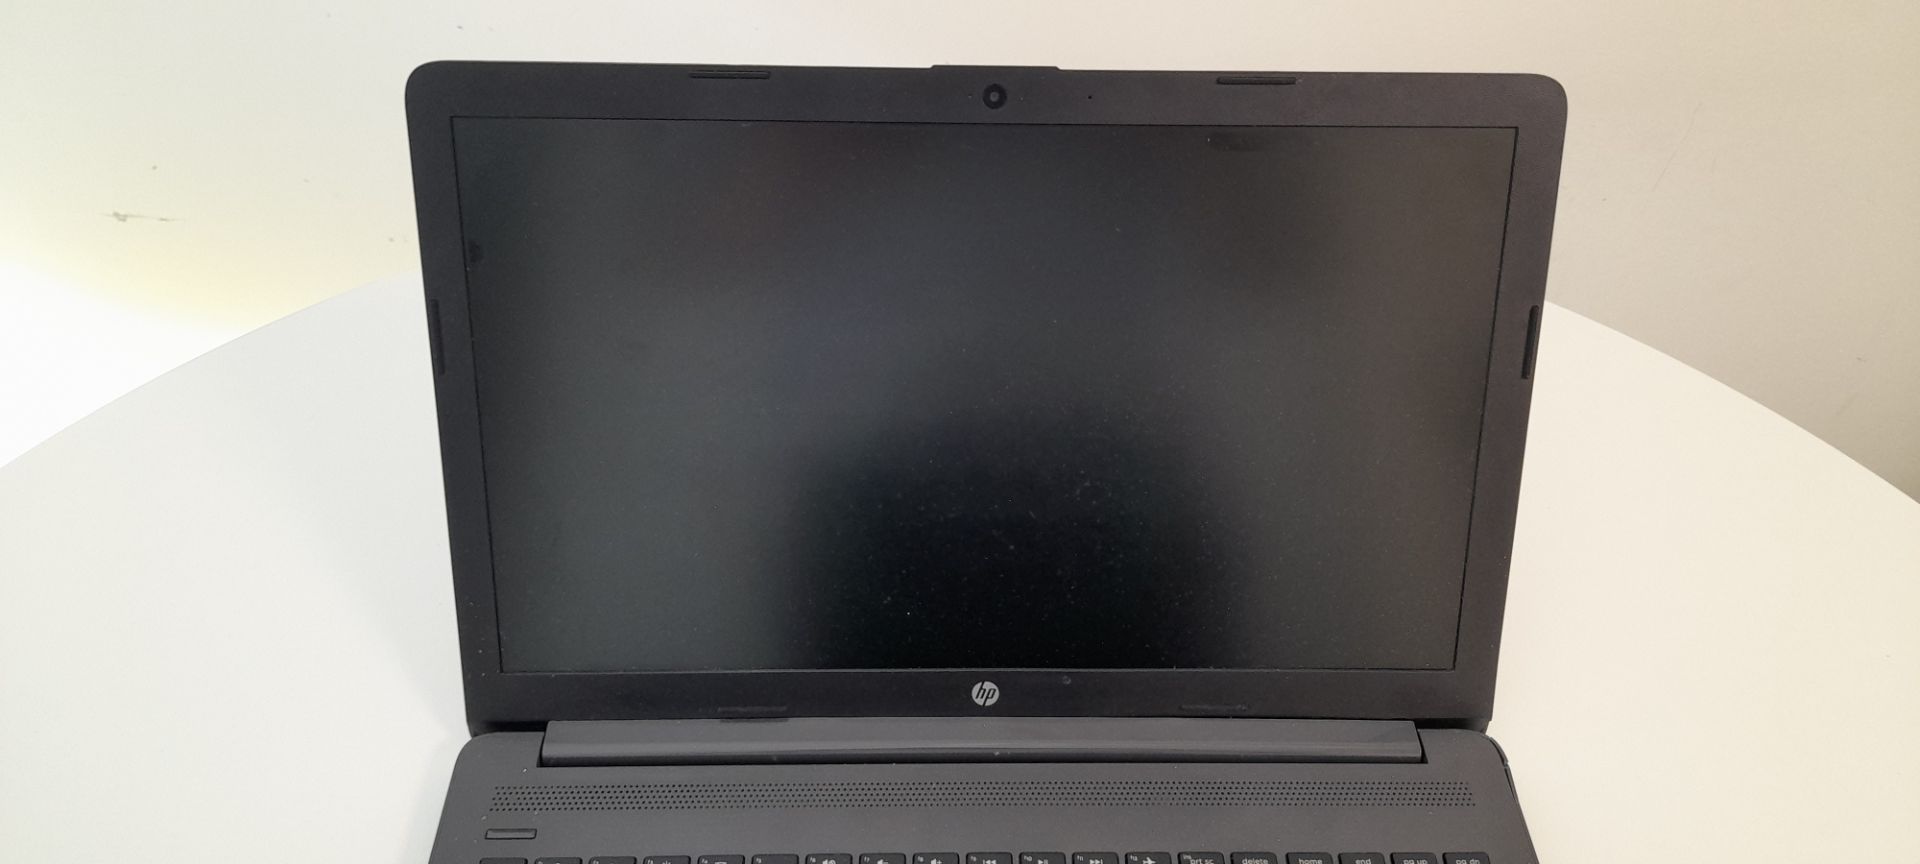 2x HP G250 G7 laptop with intel Core i5, 8th Gen. Collection from Canary Wharf, London, E14 - Image 13 of 15